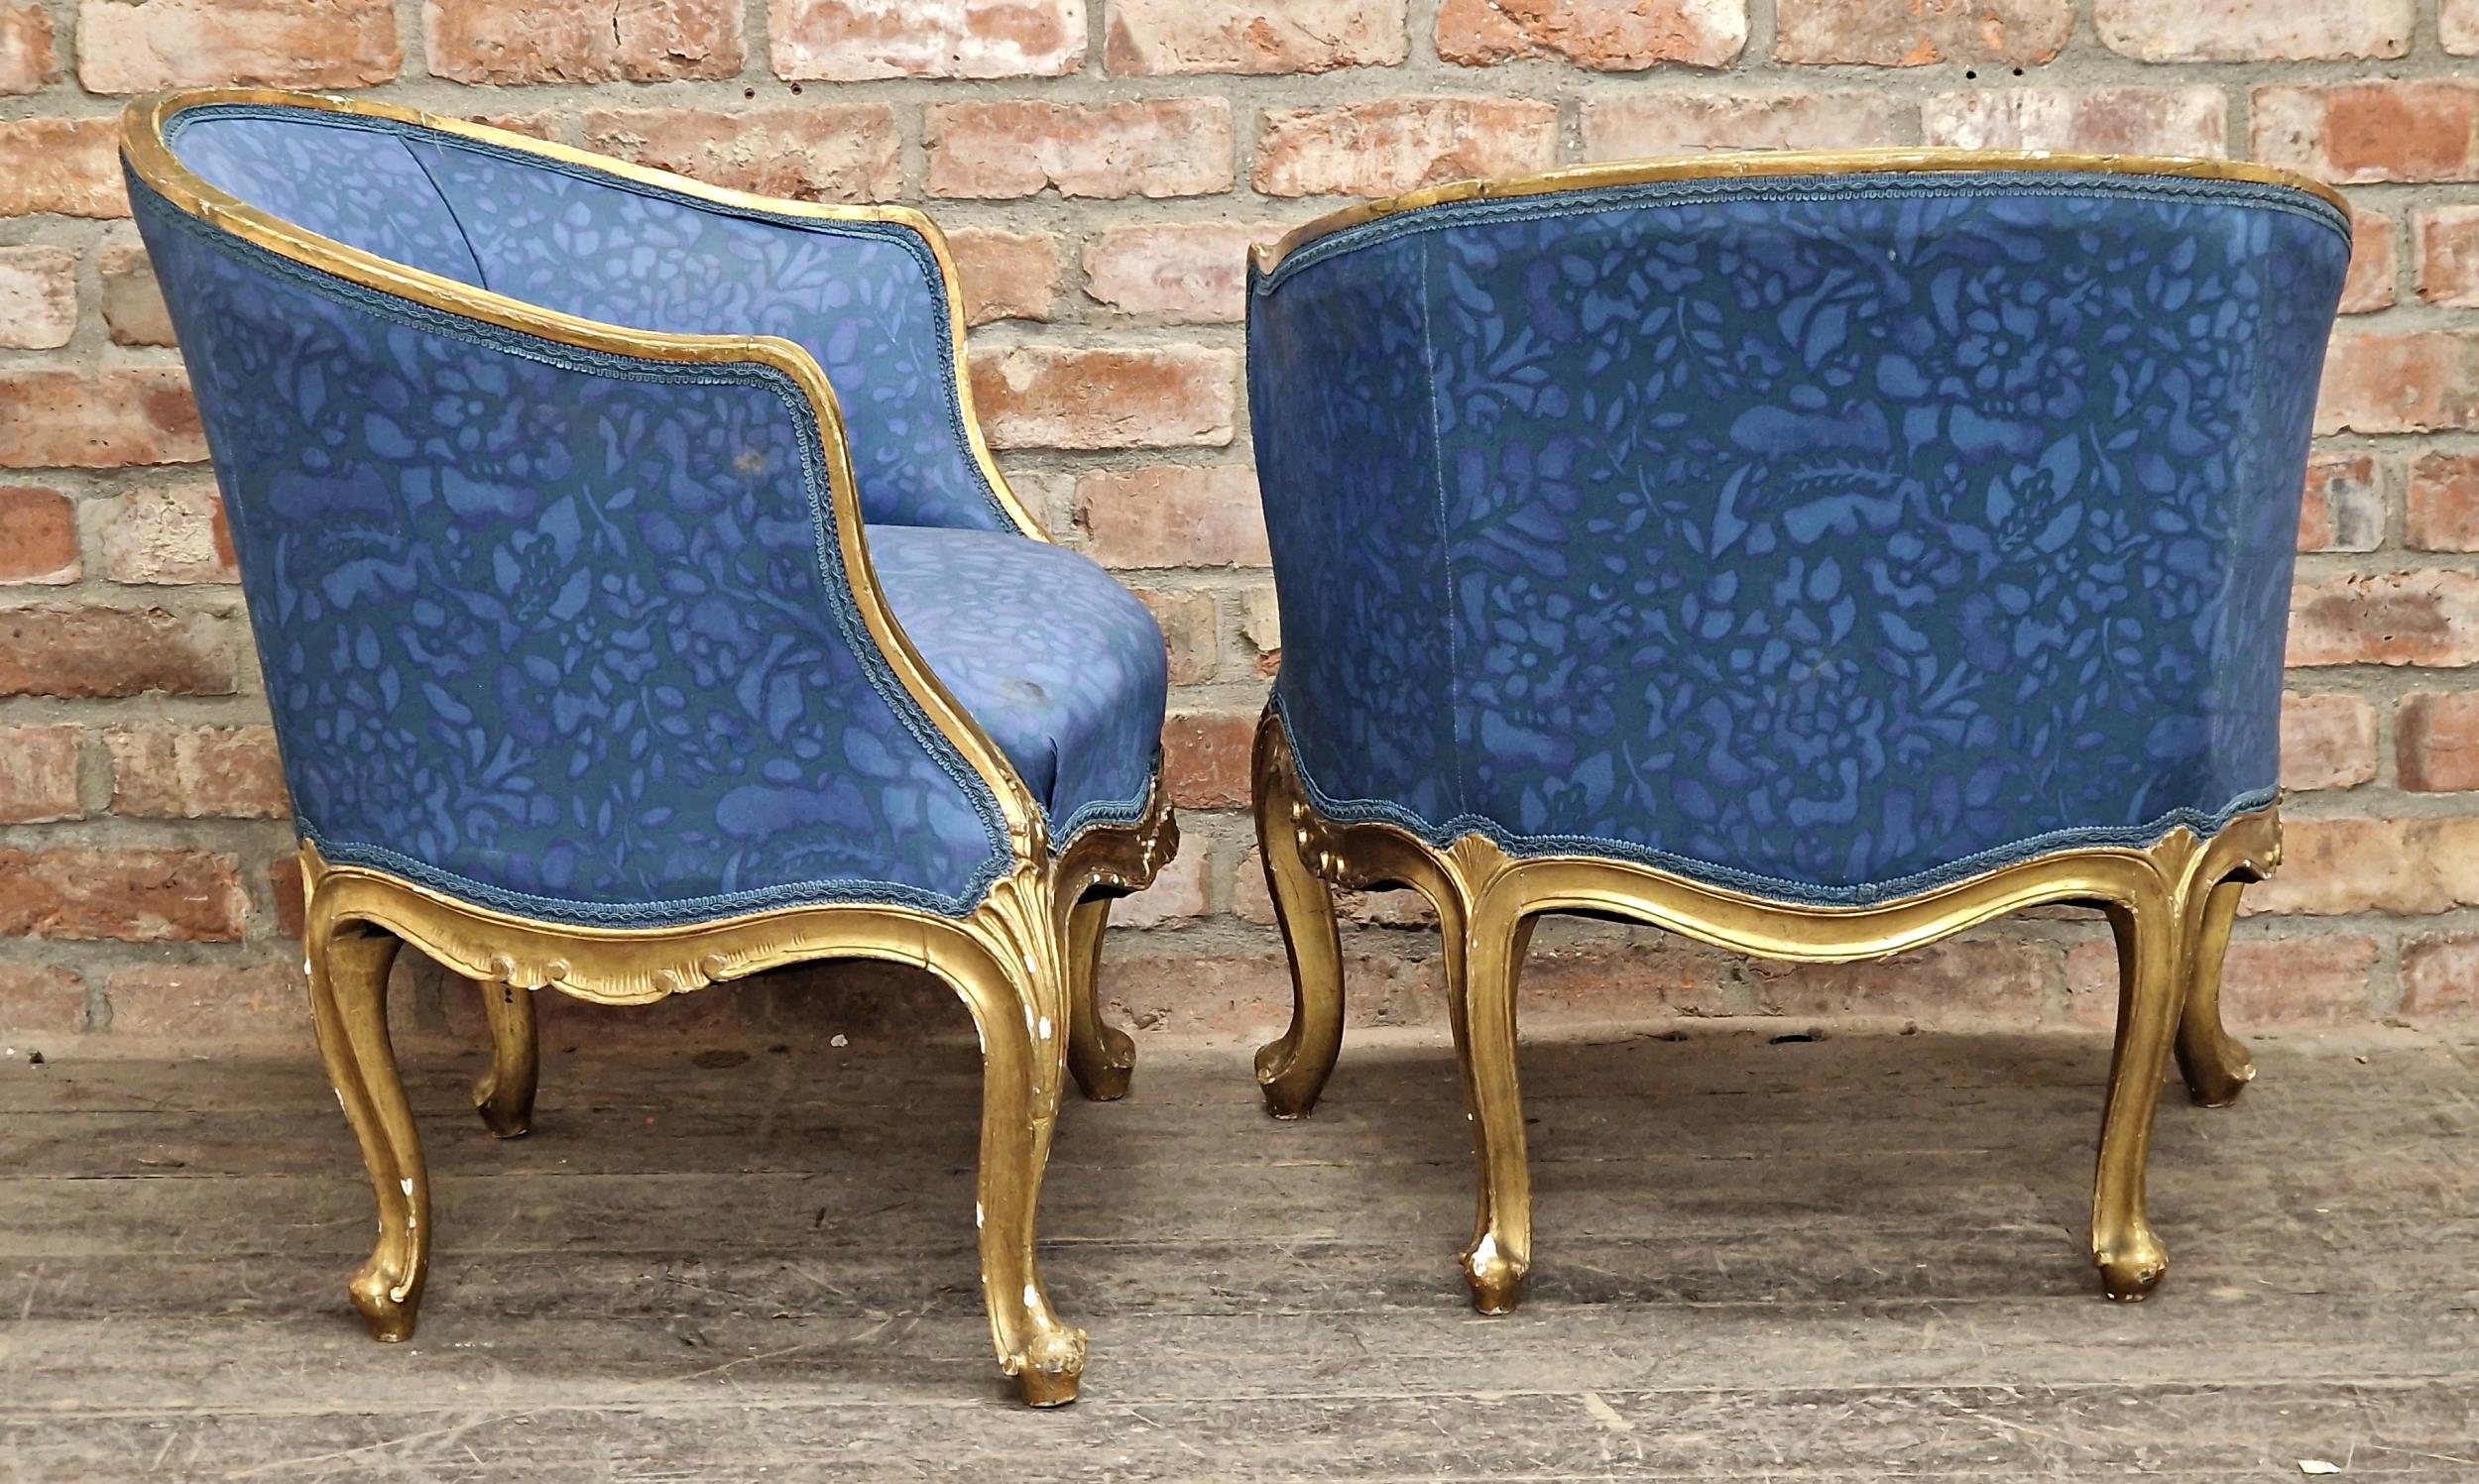 Pair of good quality 19th century French gilt wood tub chairs with blue floral fabric upholstery, - Image 5 of 5